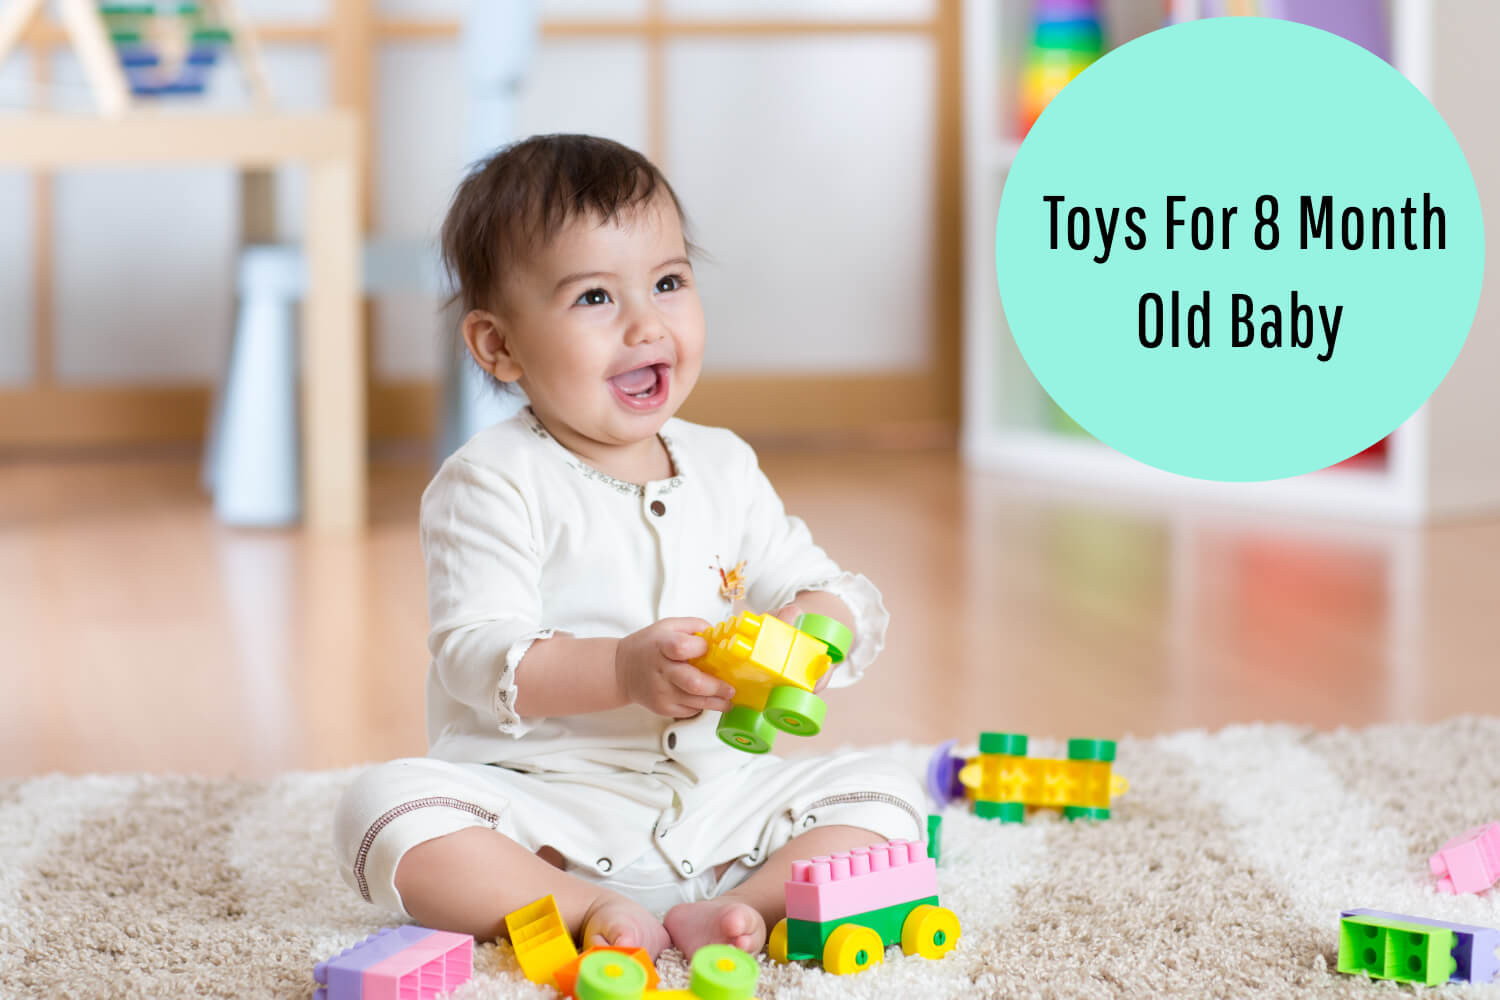 Toys For 8 Month Old Baby – Types, Benefits and What to Buy